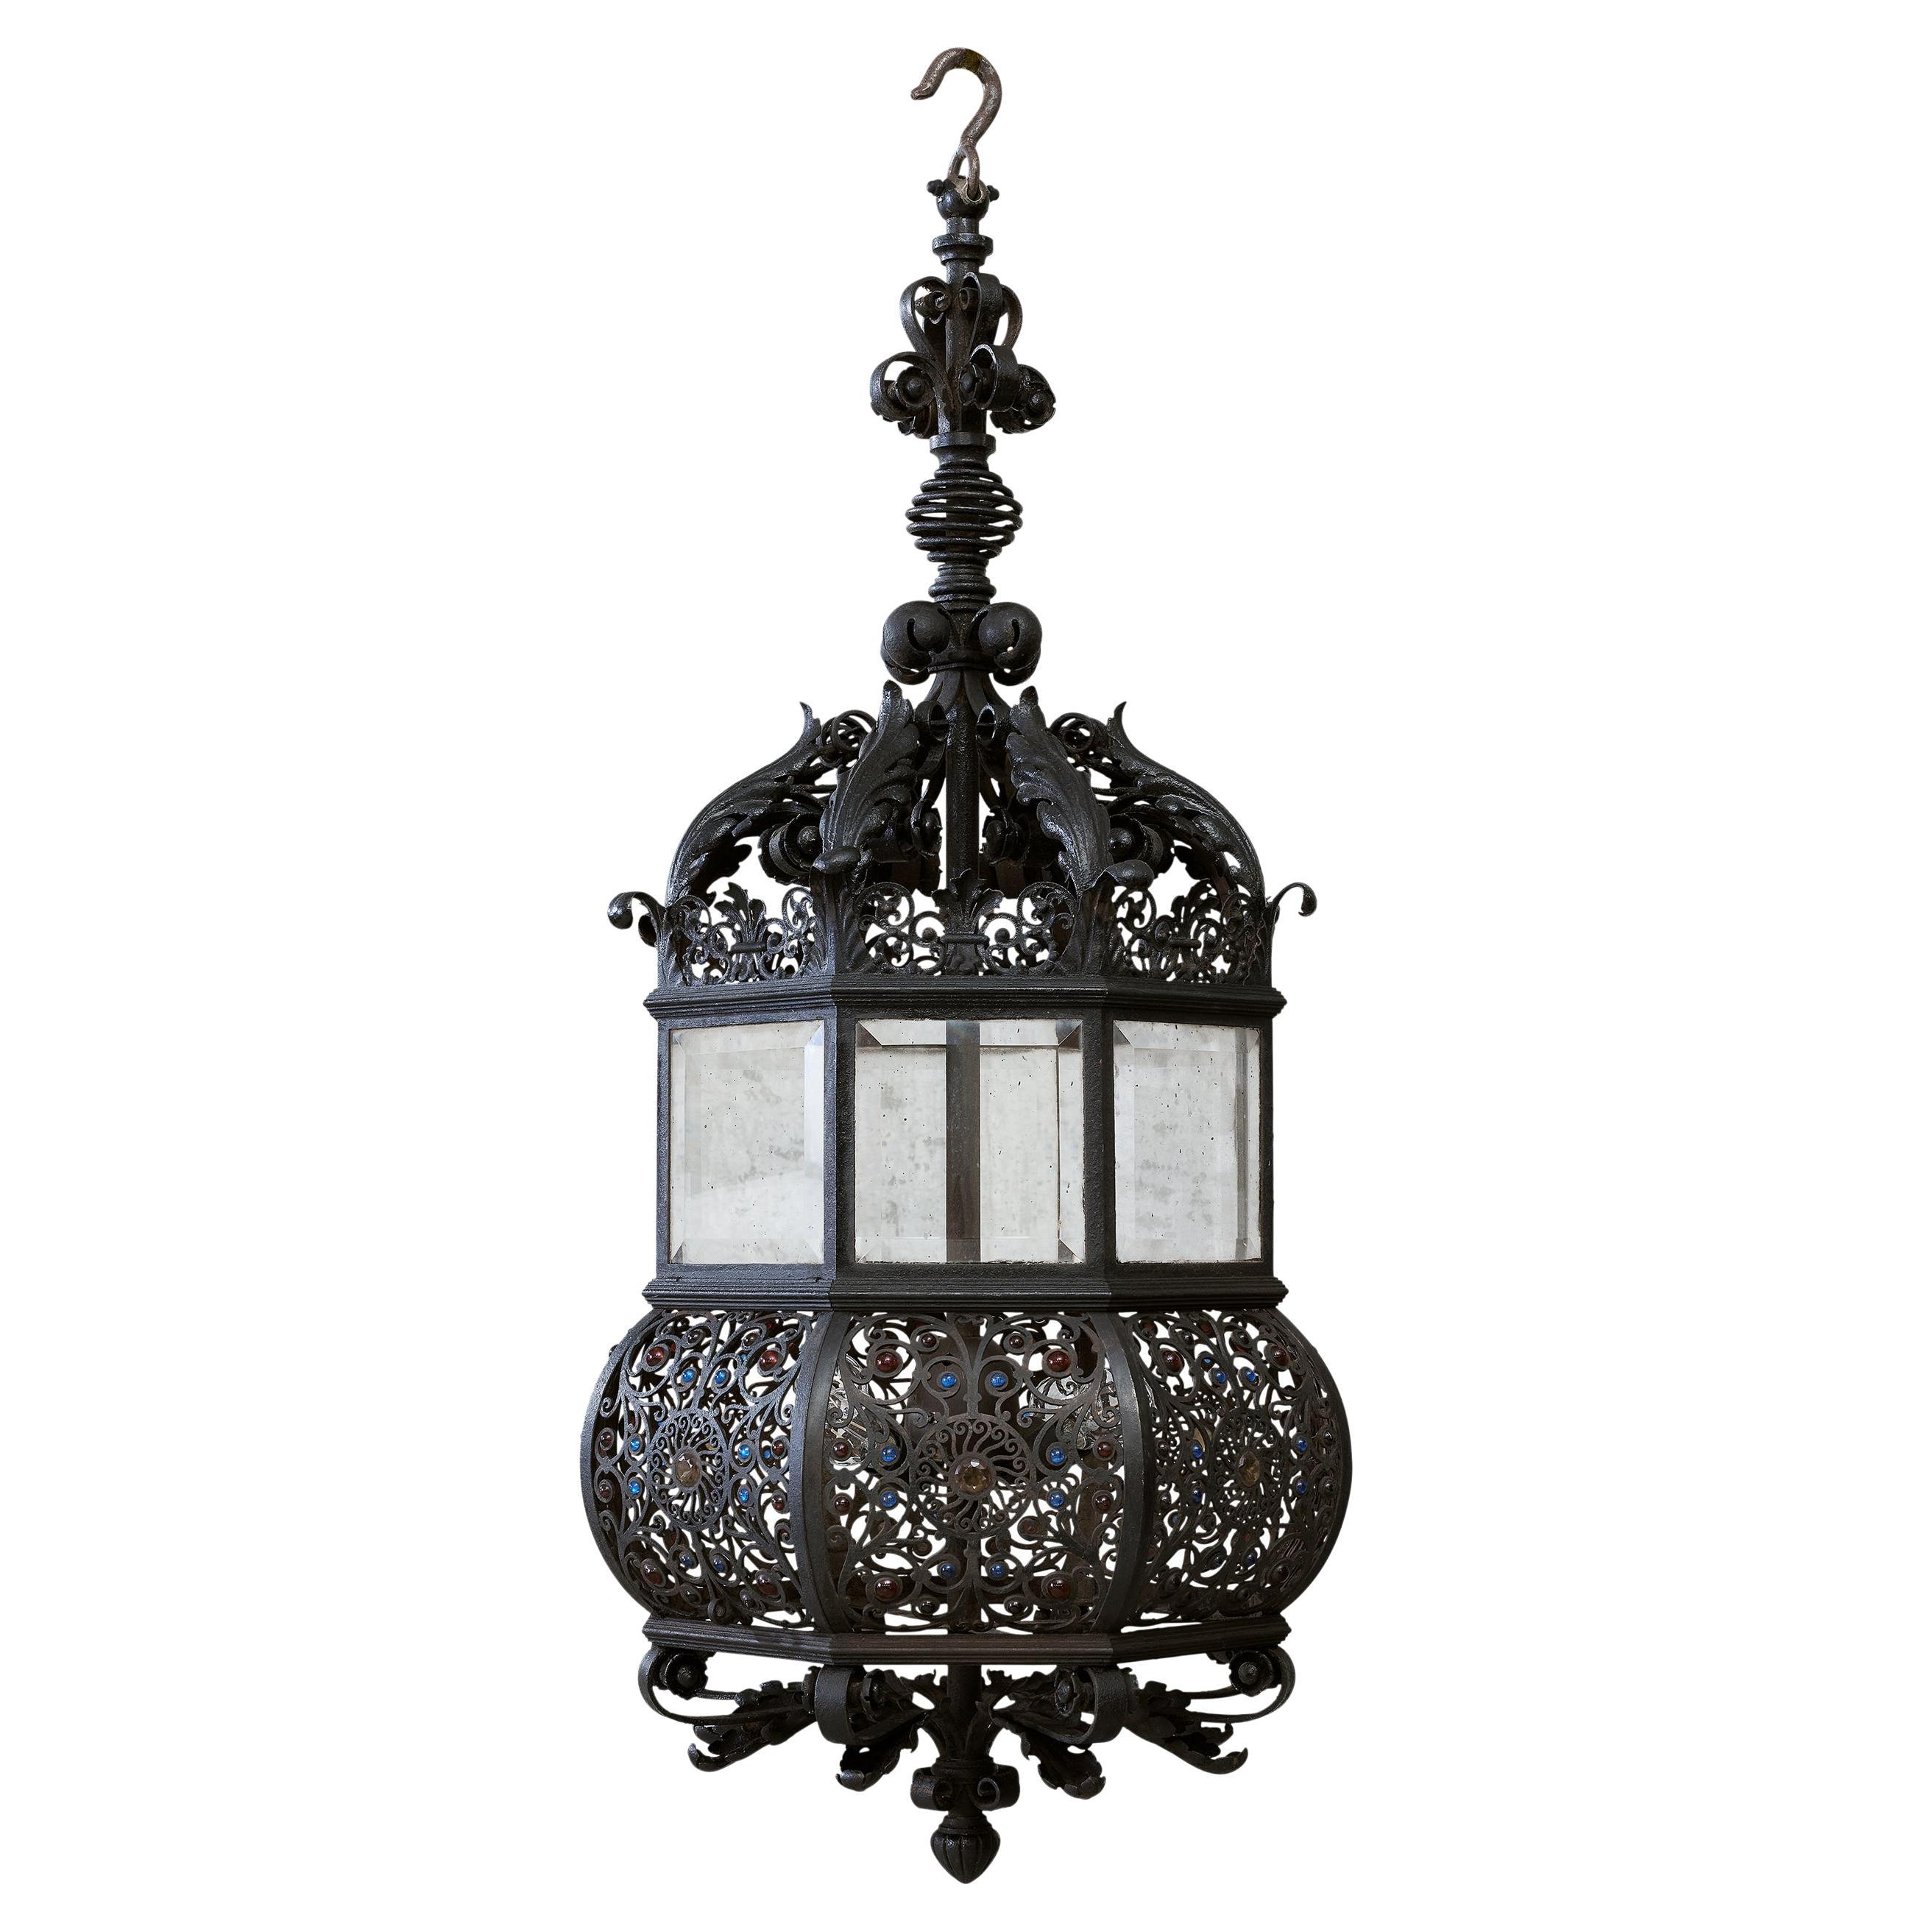 A Fine Wrought Iron And Glass Four-Light Hanging Lamp For Sale